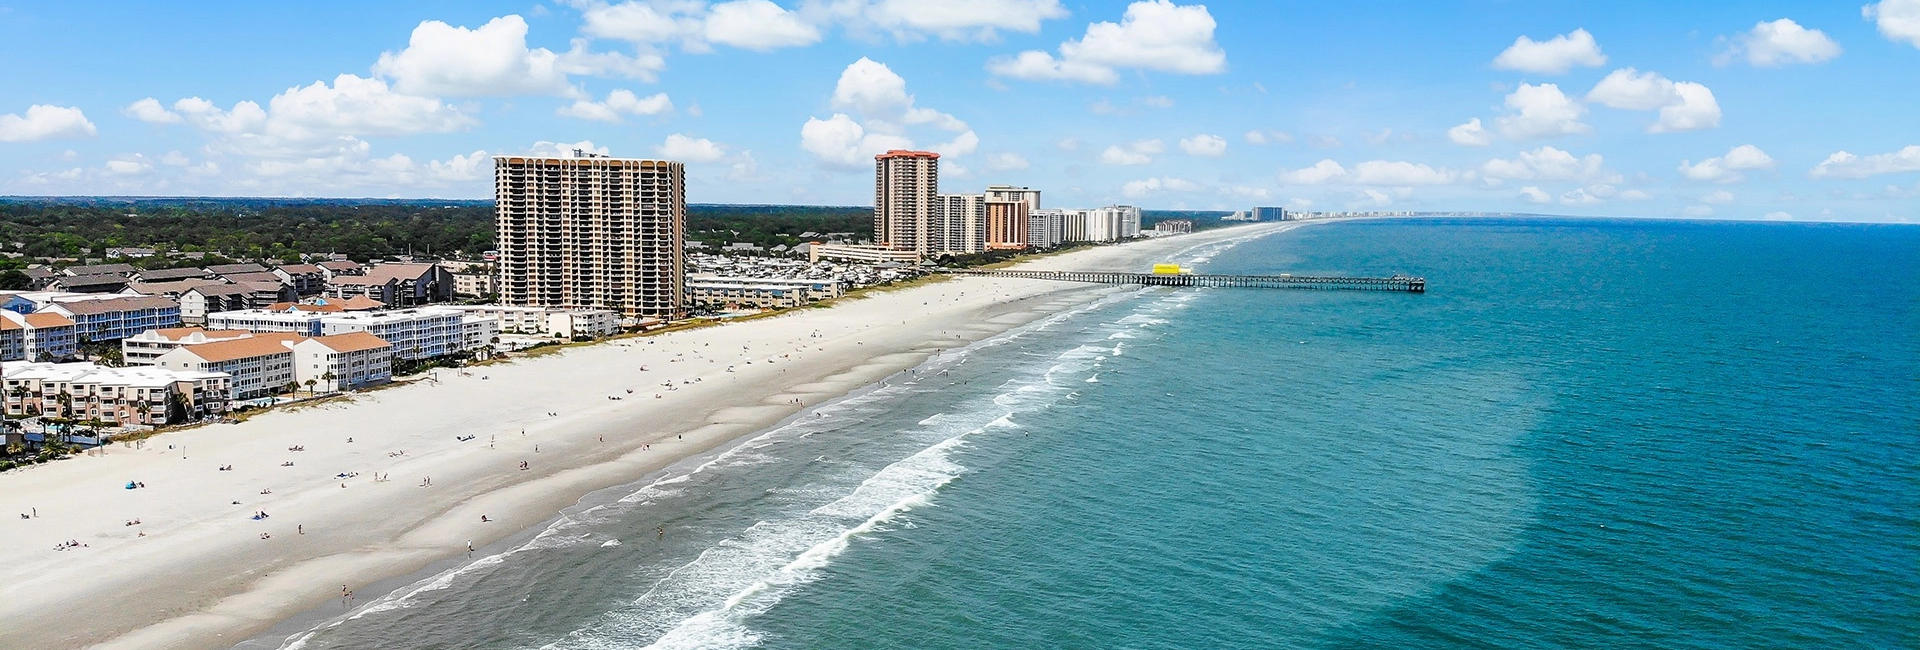 A Memorial Day Weekend Guide for Myrtle Beach Myrtle Beach Resorts